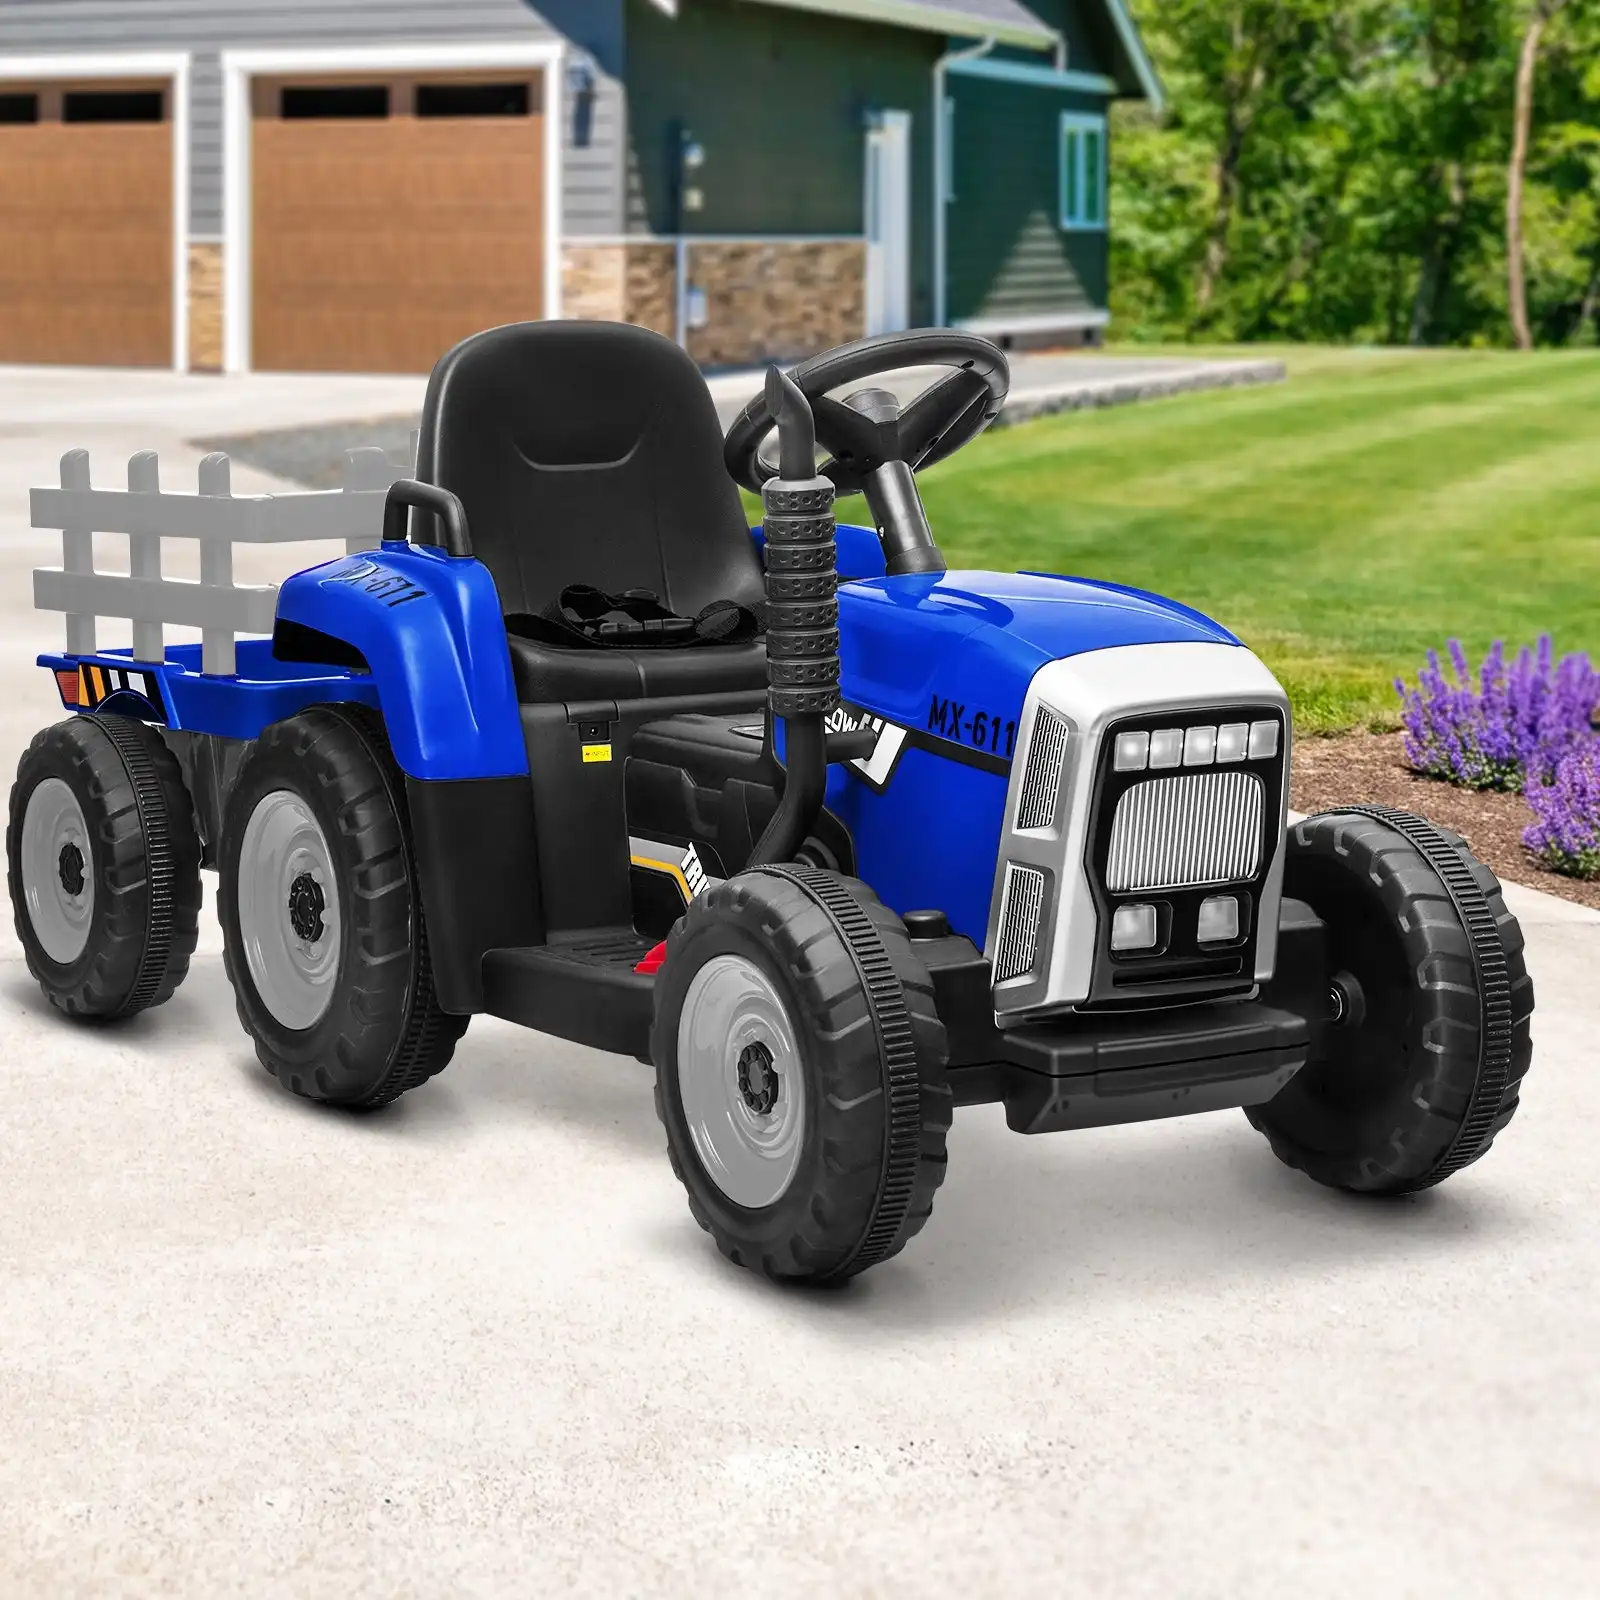 Mazam Kids Ride On Tractor W/ Trailer 12V Electric Vehicle Toys Gift Bluetooth